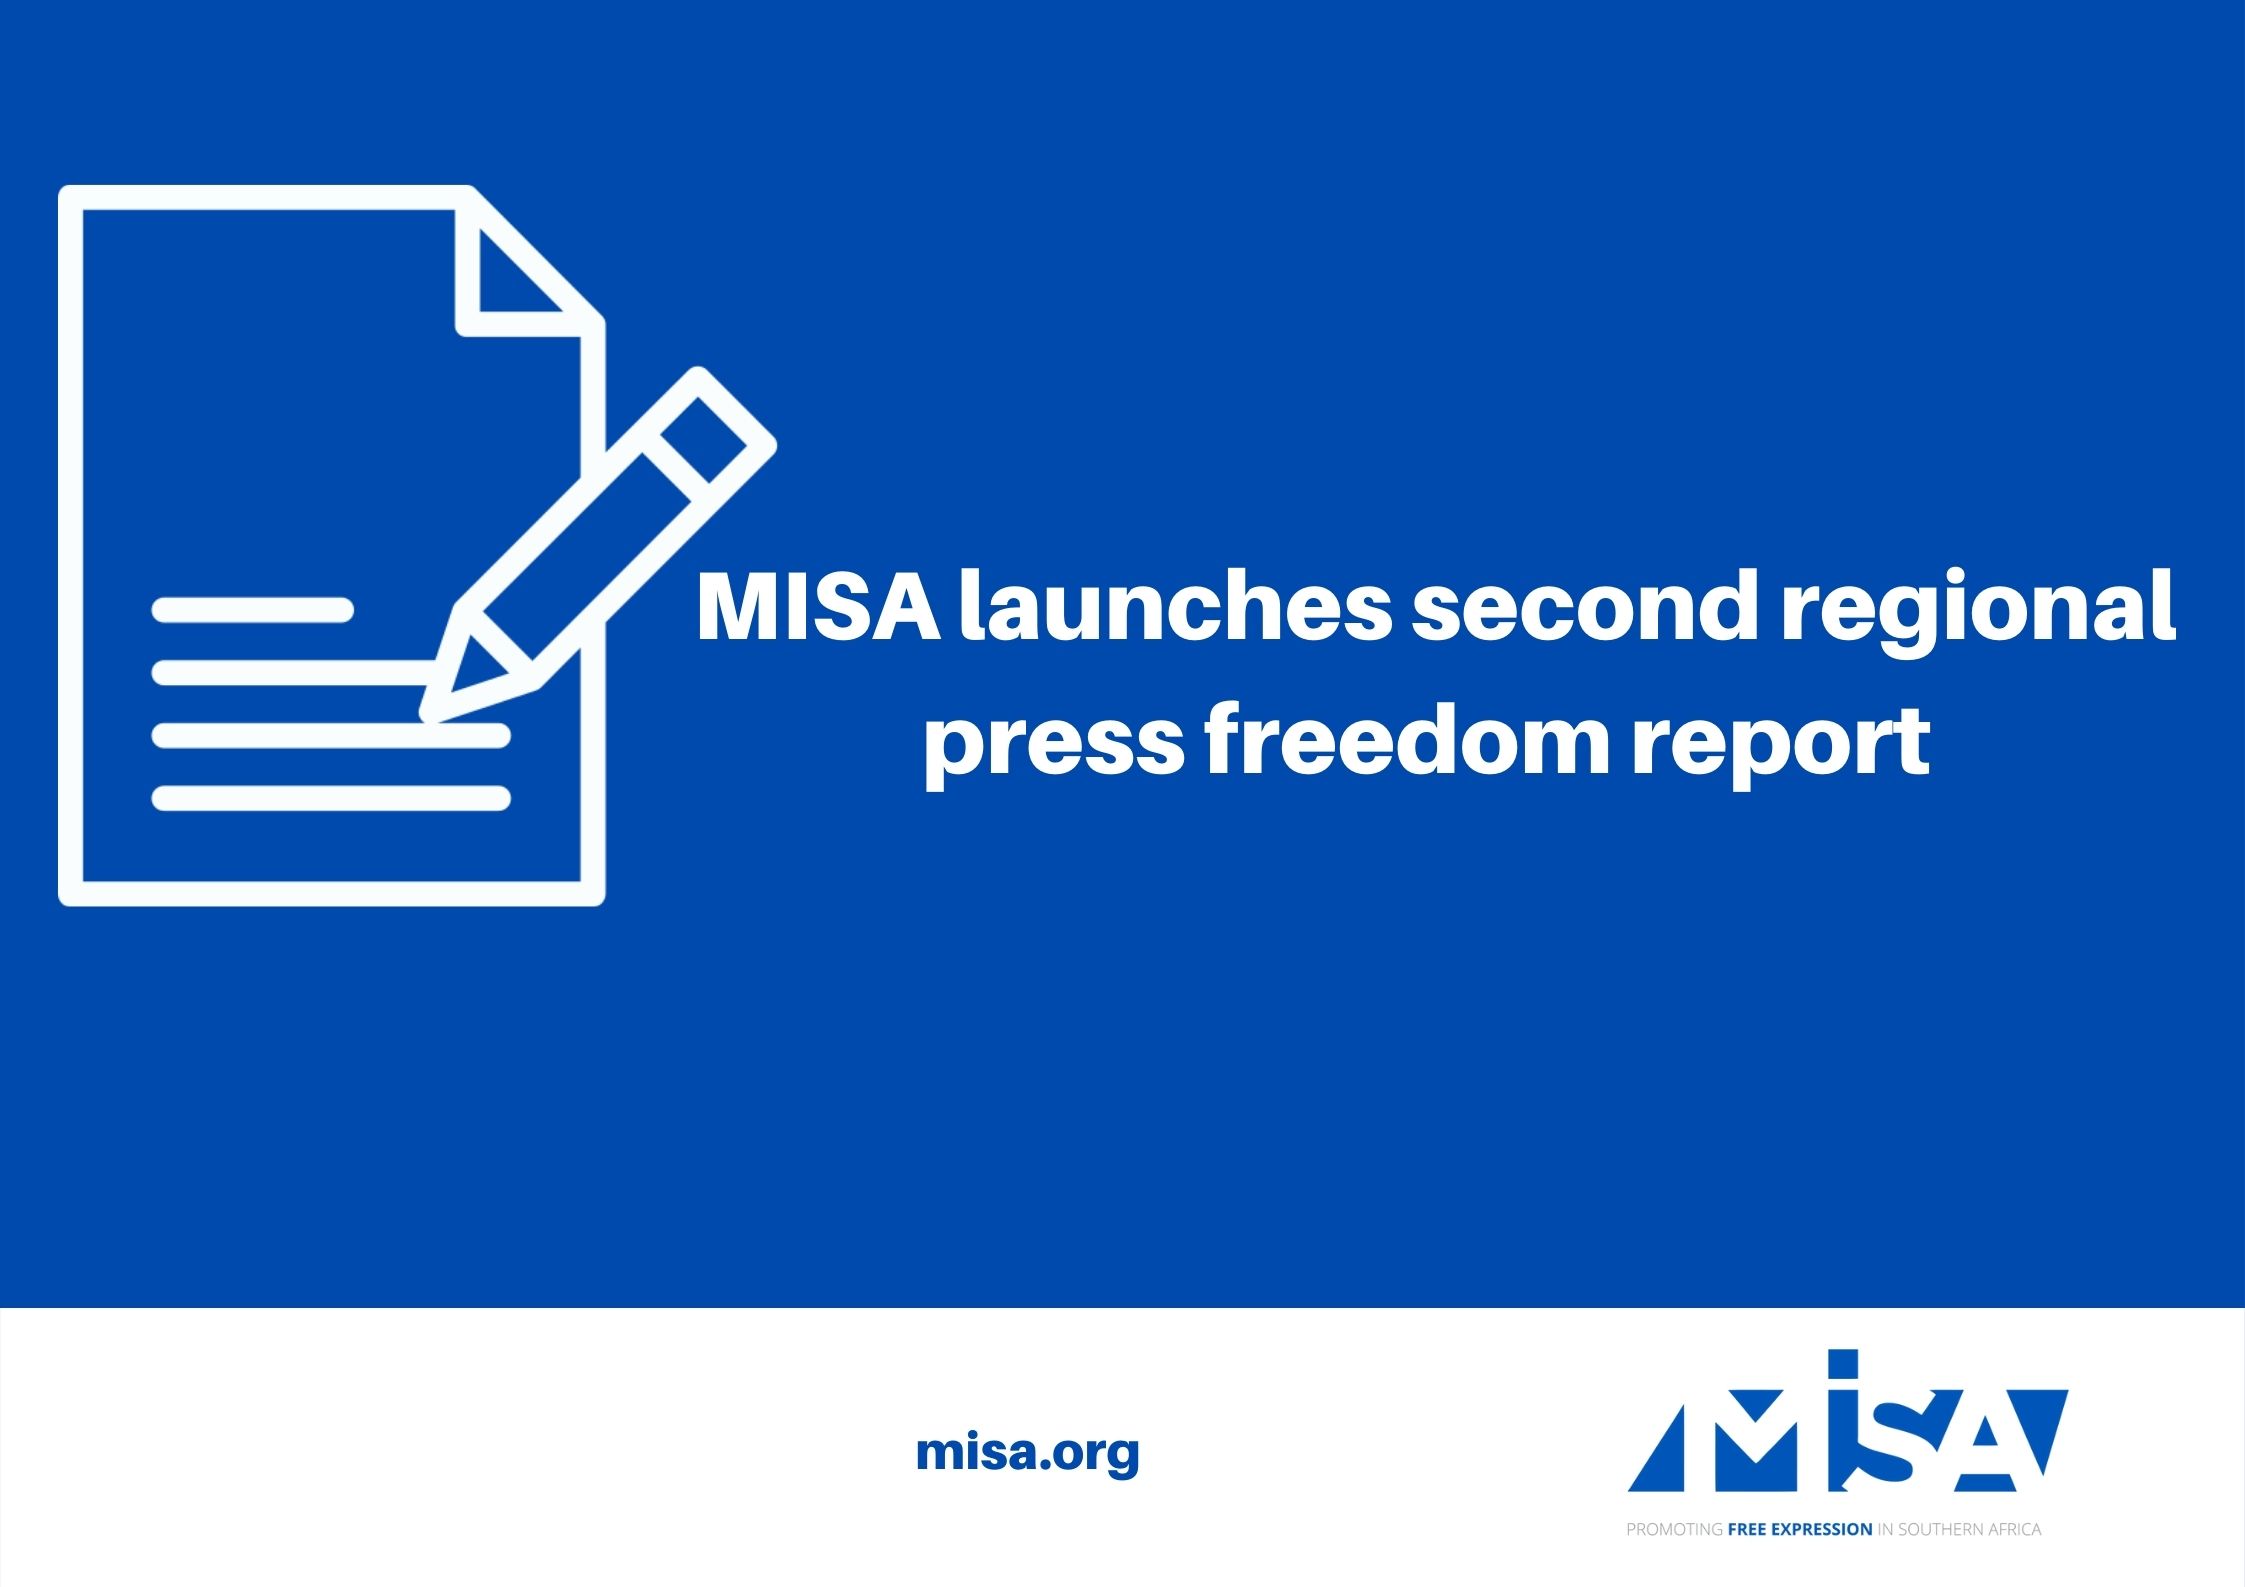 MISA launches second regional press freedom report